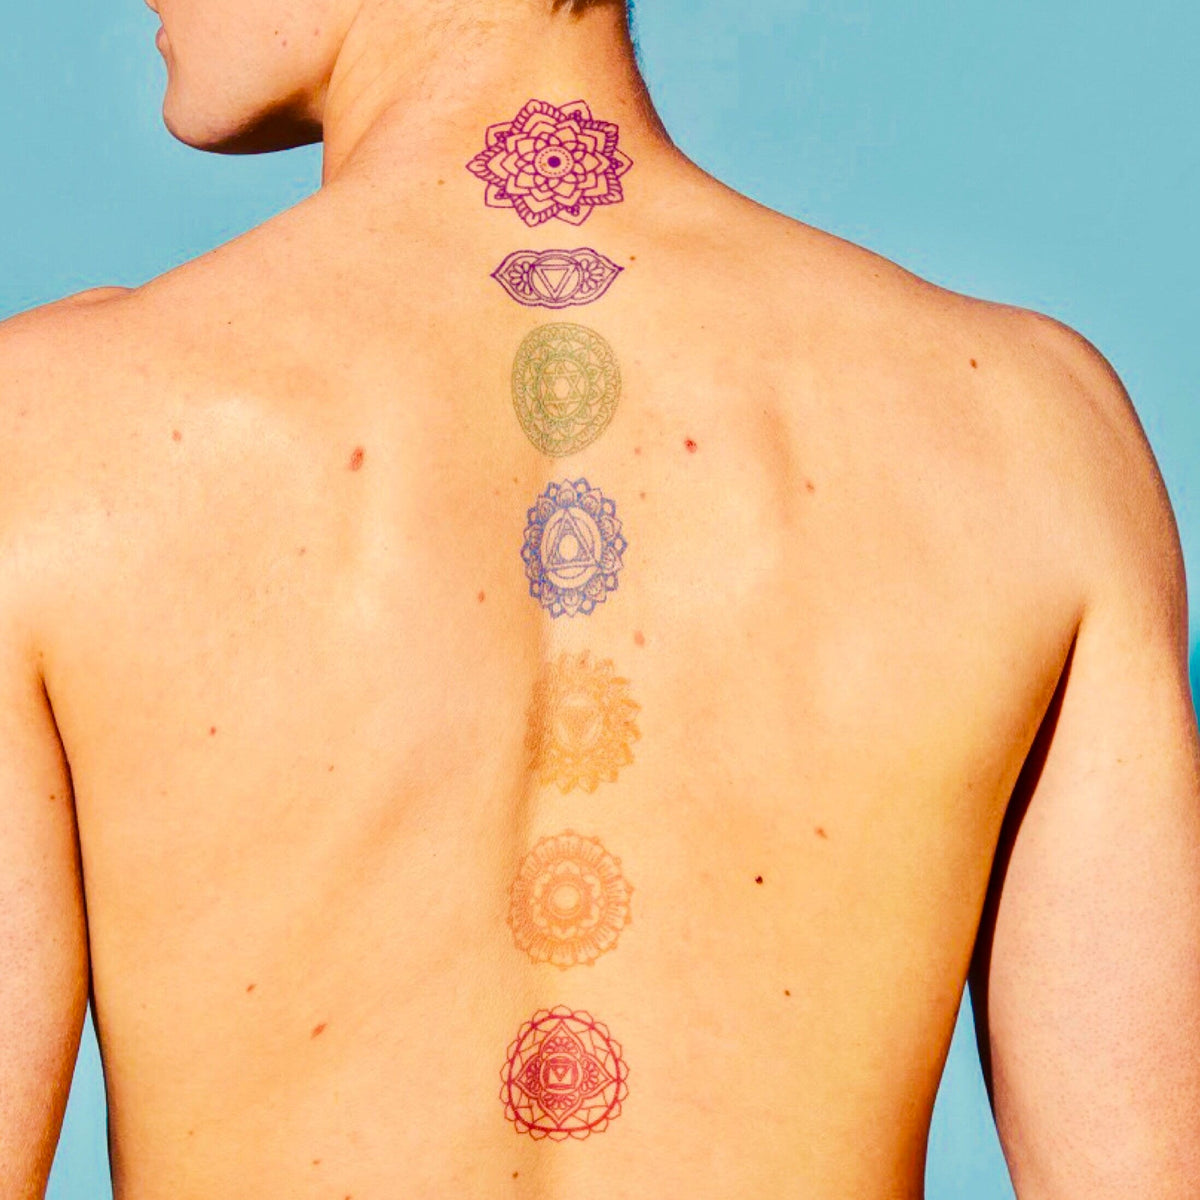 The chakra symbol has for many centuries been a symbol of different  attributes of the mind, body, and spirit. The theory behind the power... |  Instagram